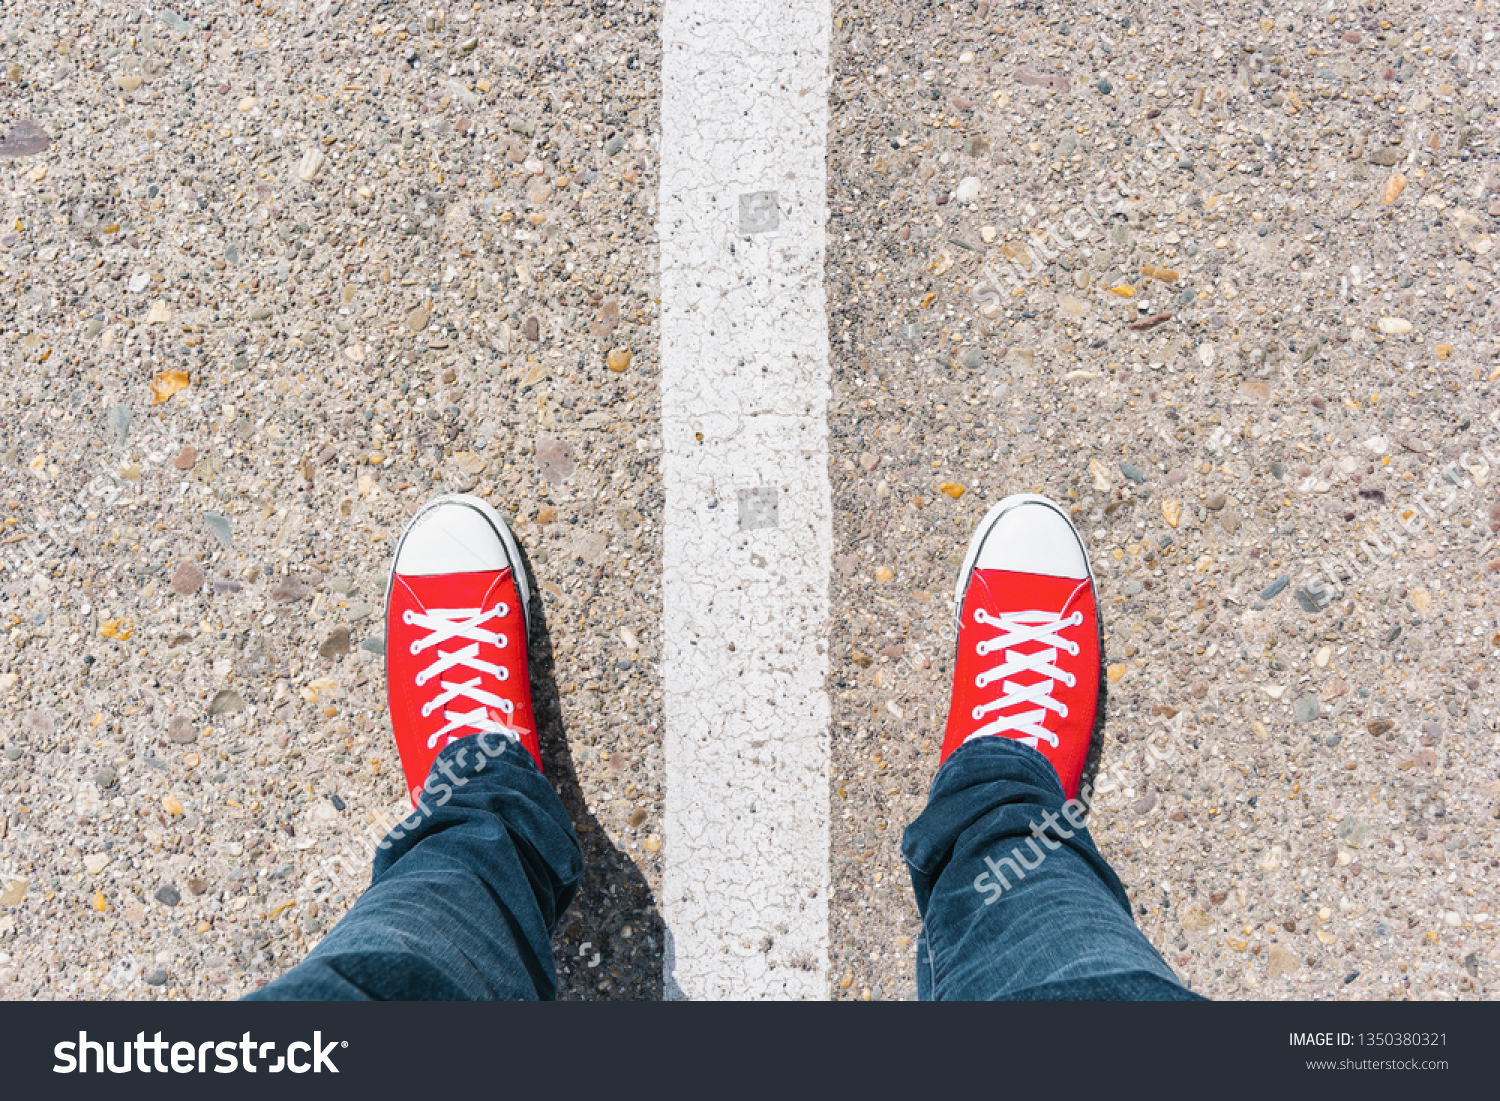 Man standing on grunge asphalt city street with white line on the floor, point of view perspective #1350380321